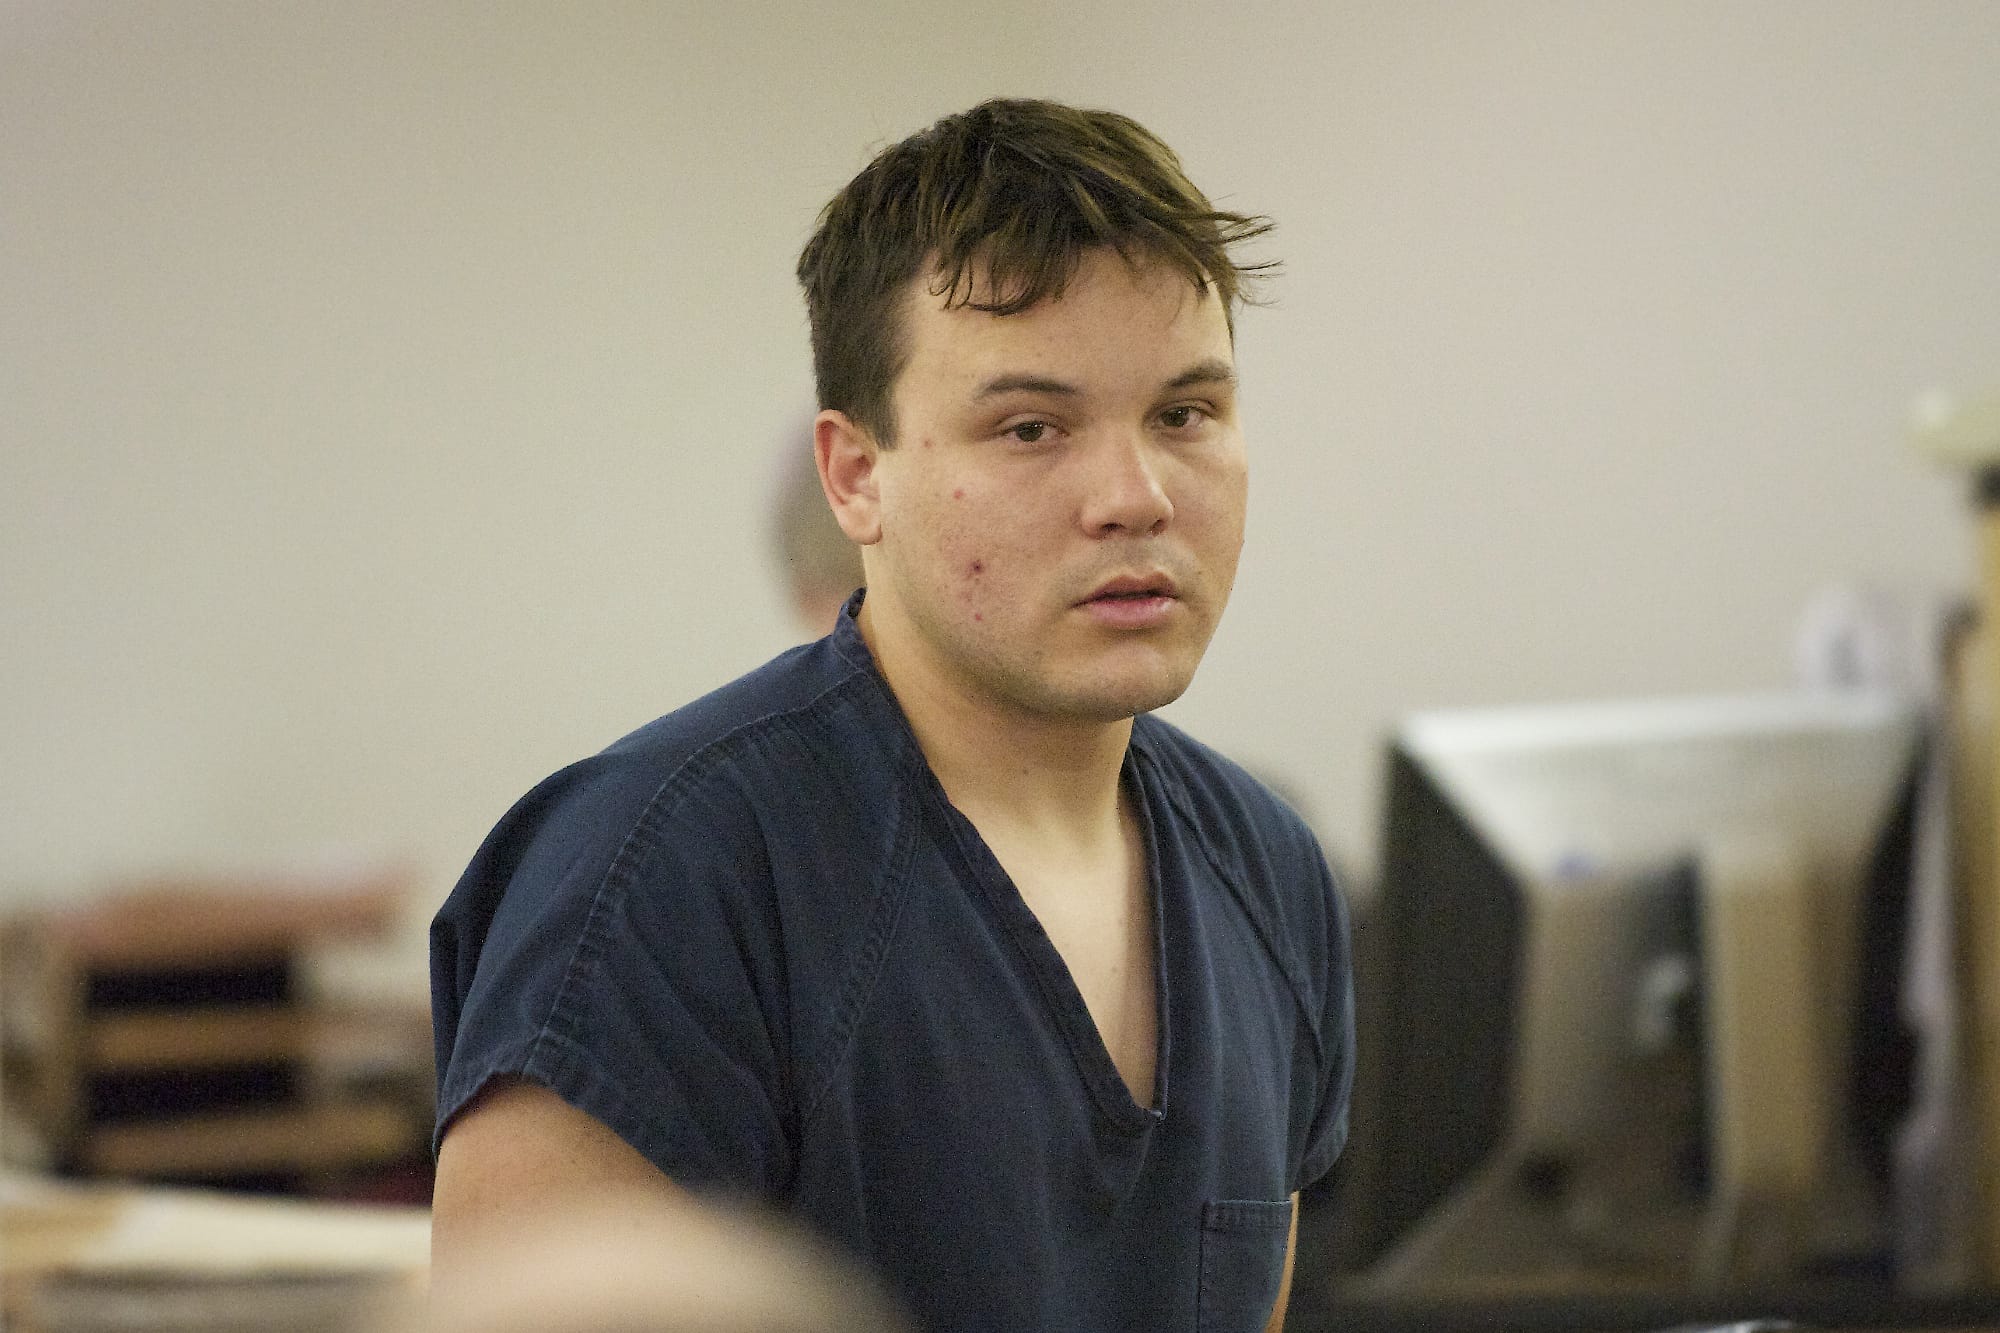 Keven Carlson-Aguilar appears in Clark County Superior Court on Jan. 28.